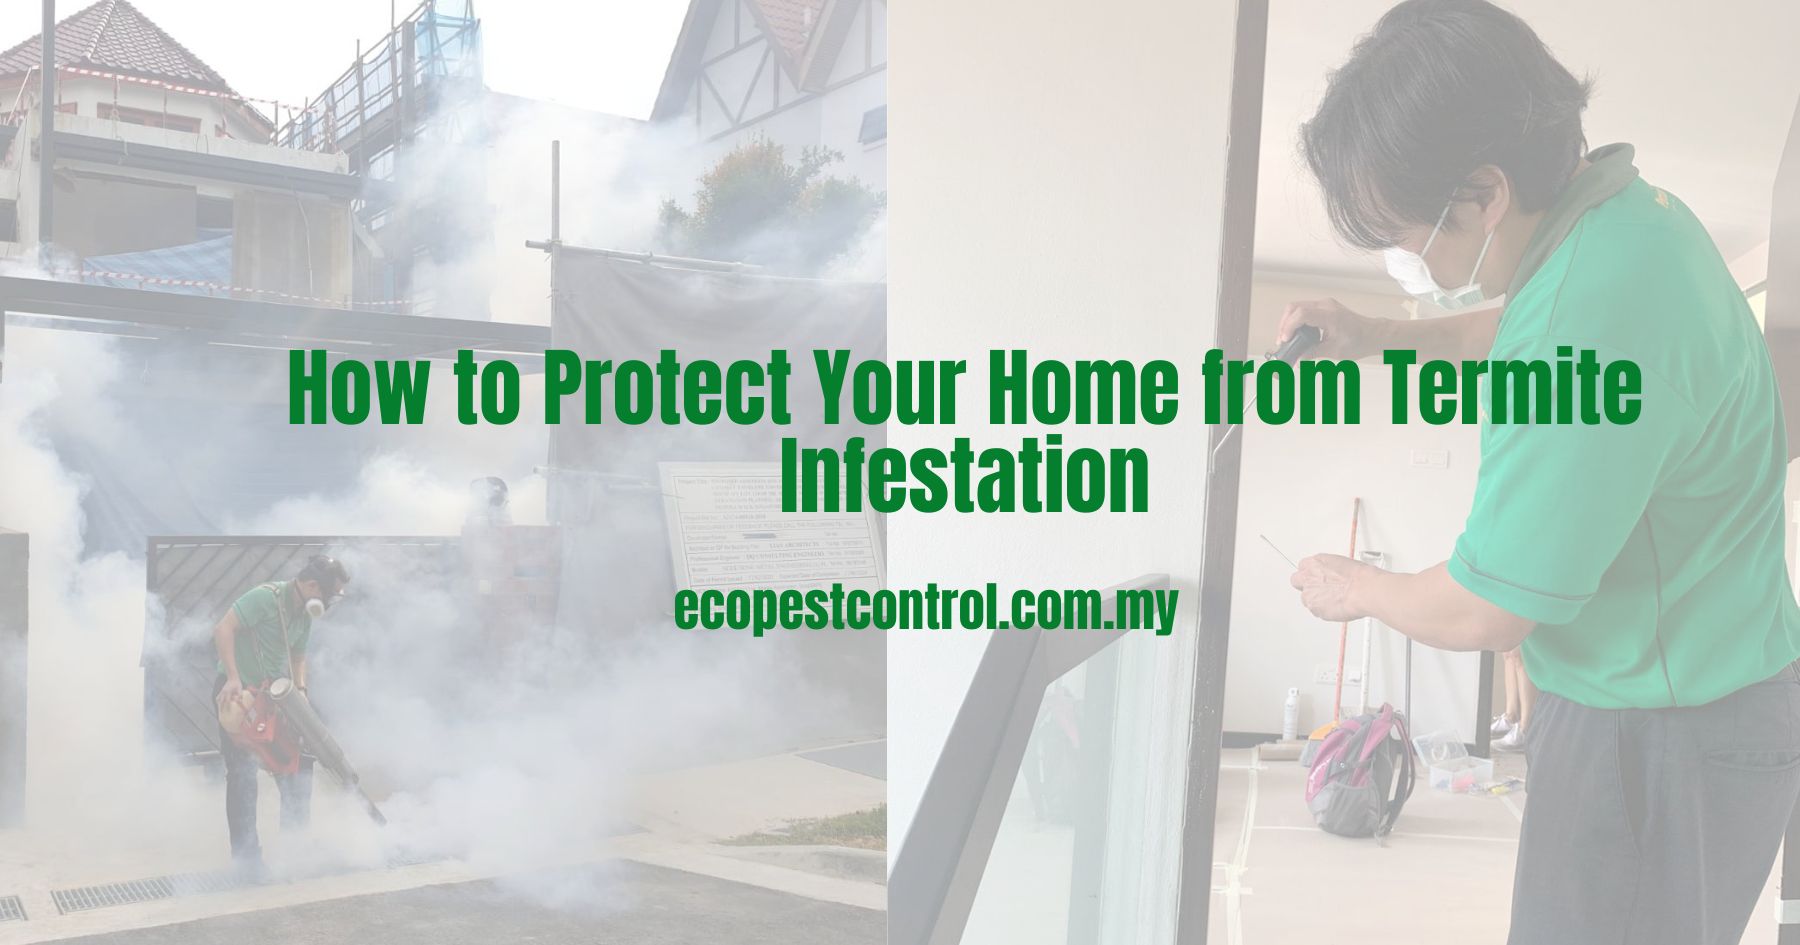 How to Protect Your Home from Termite Infestation